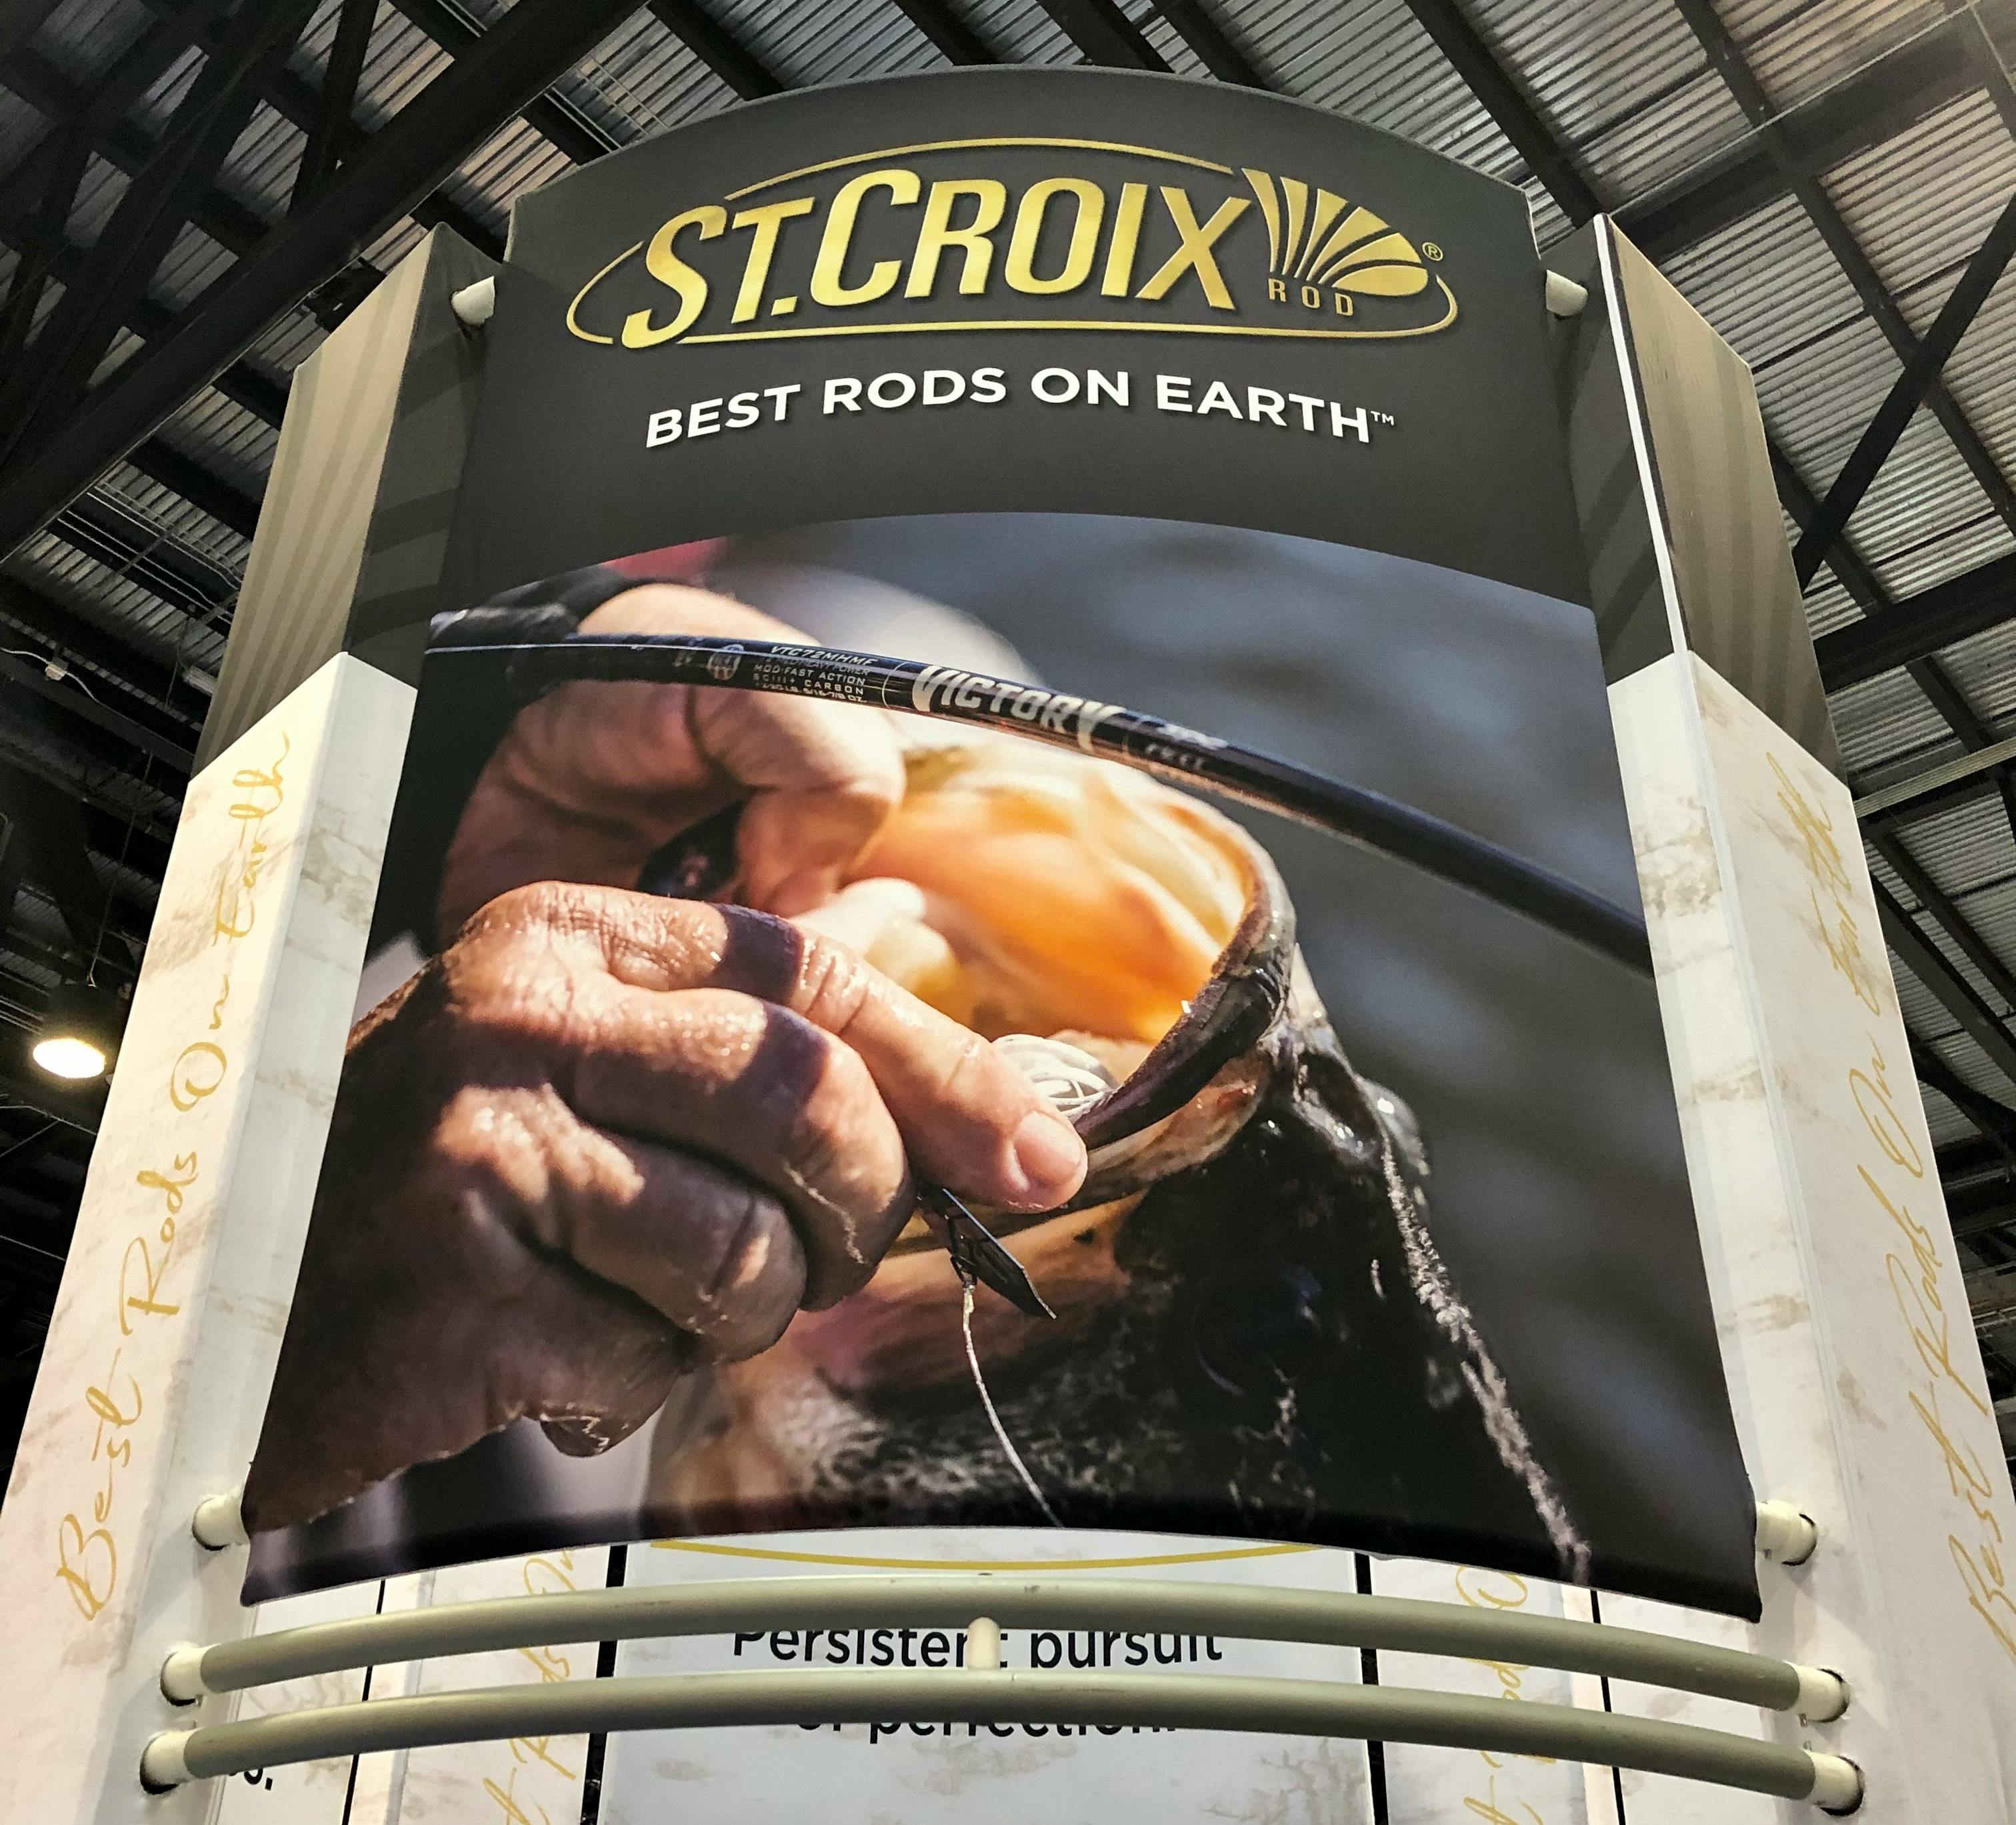 An image of the St. Croix booth at ICAST.